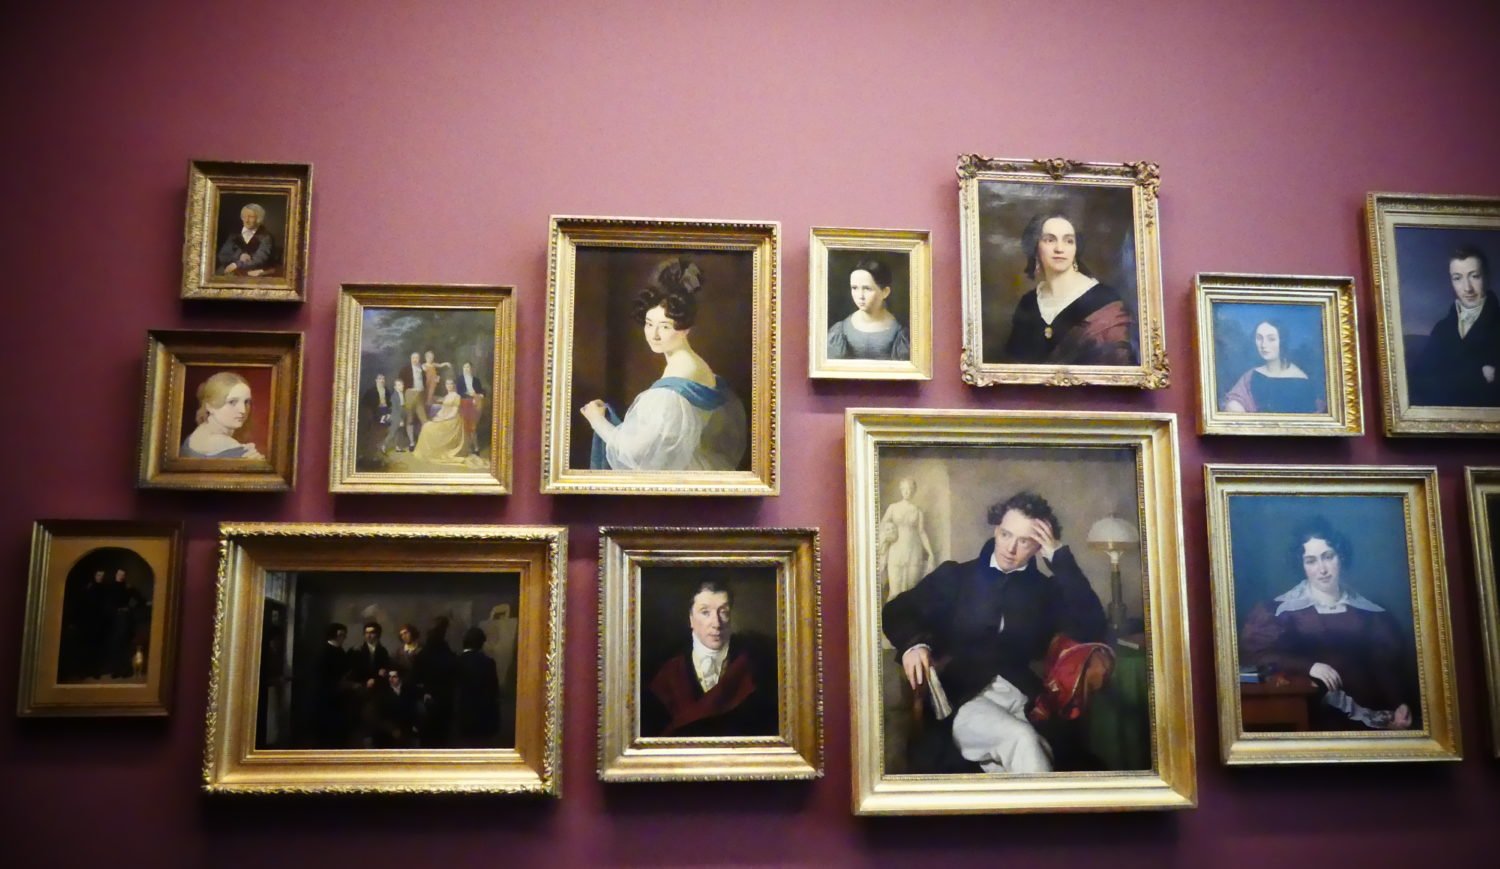 In the Bremen Kunsthalle hang many paintings of old masters